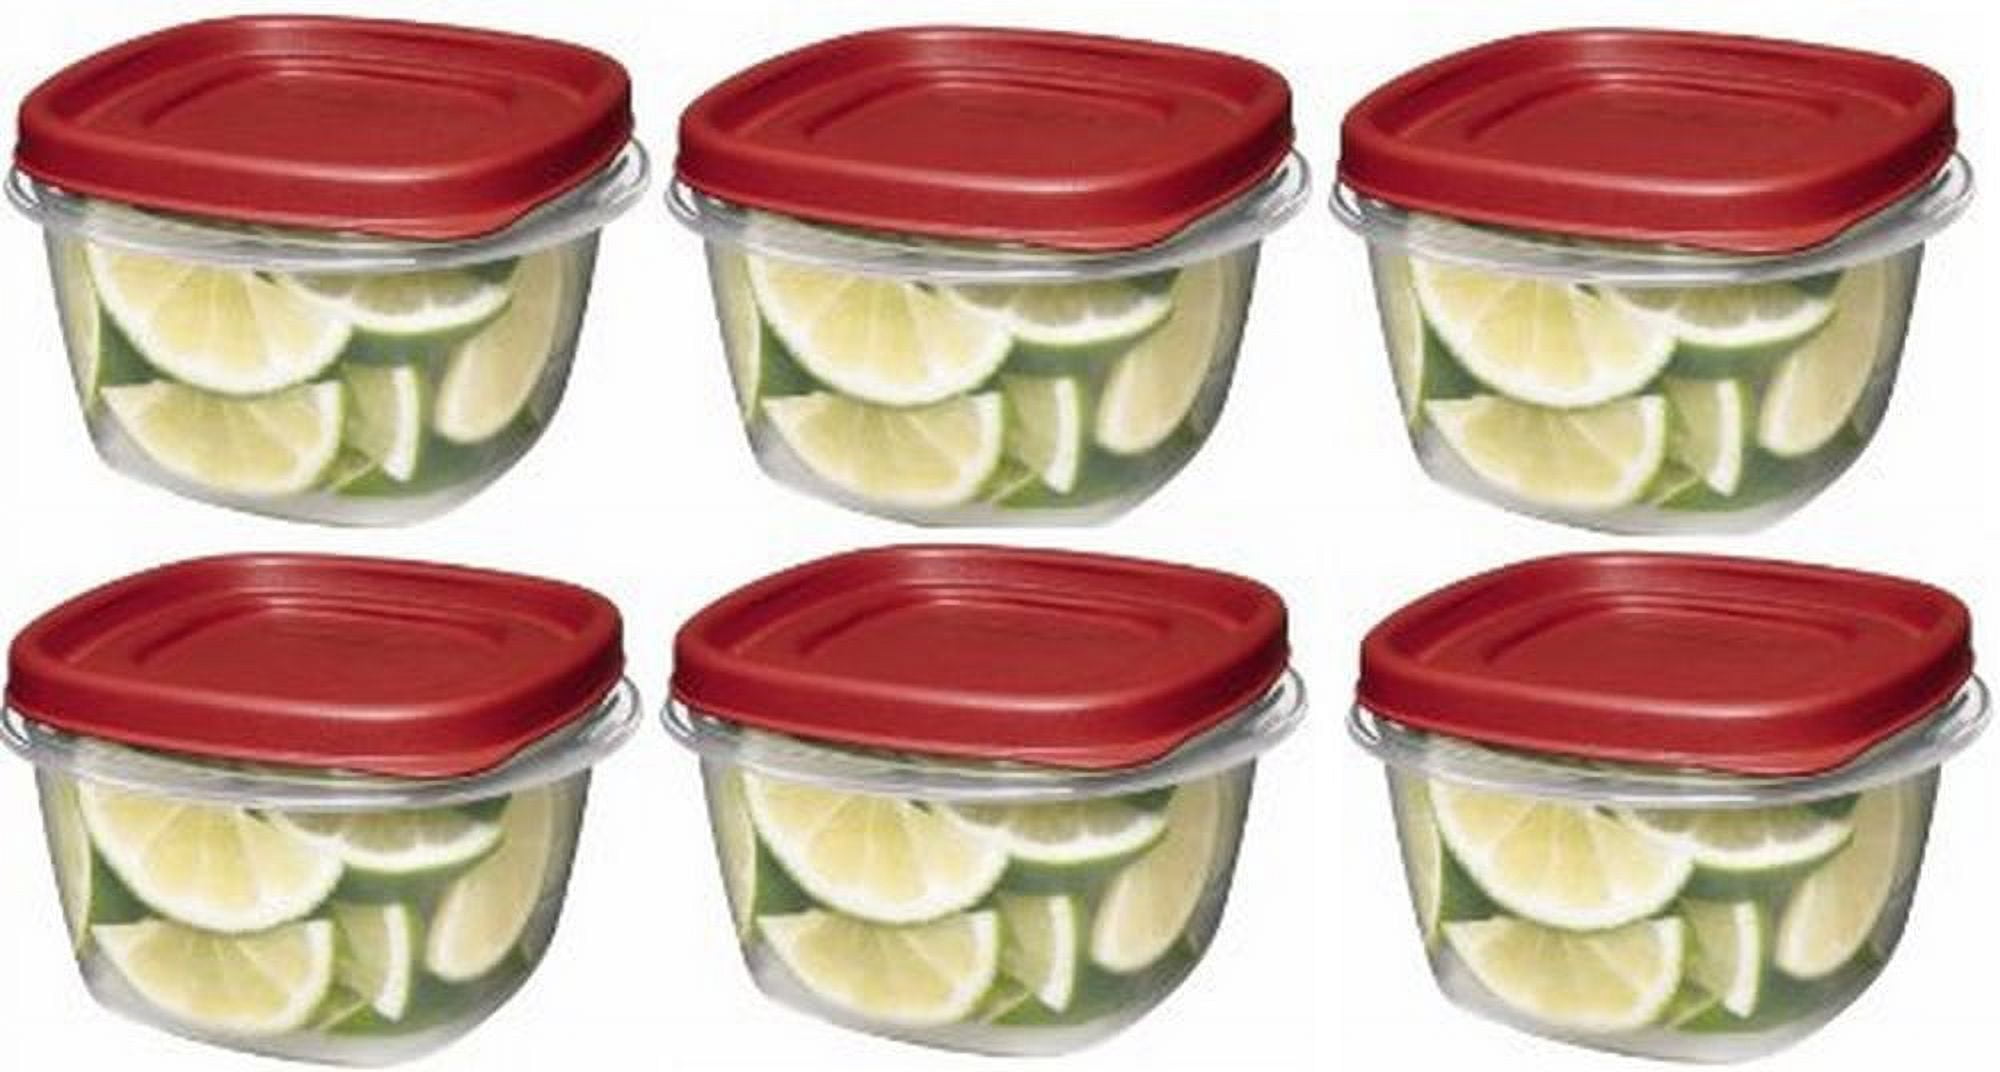 Rubbermaid Easy Find Lids Food Storage Container, 2 Cup, Racer Red 1777085